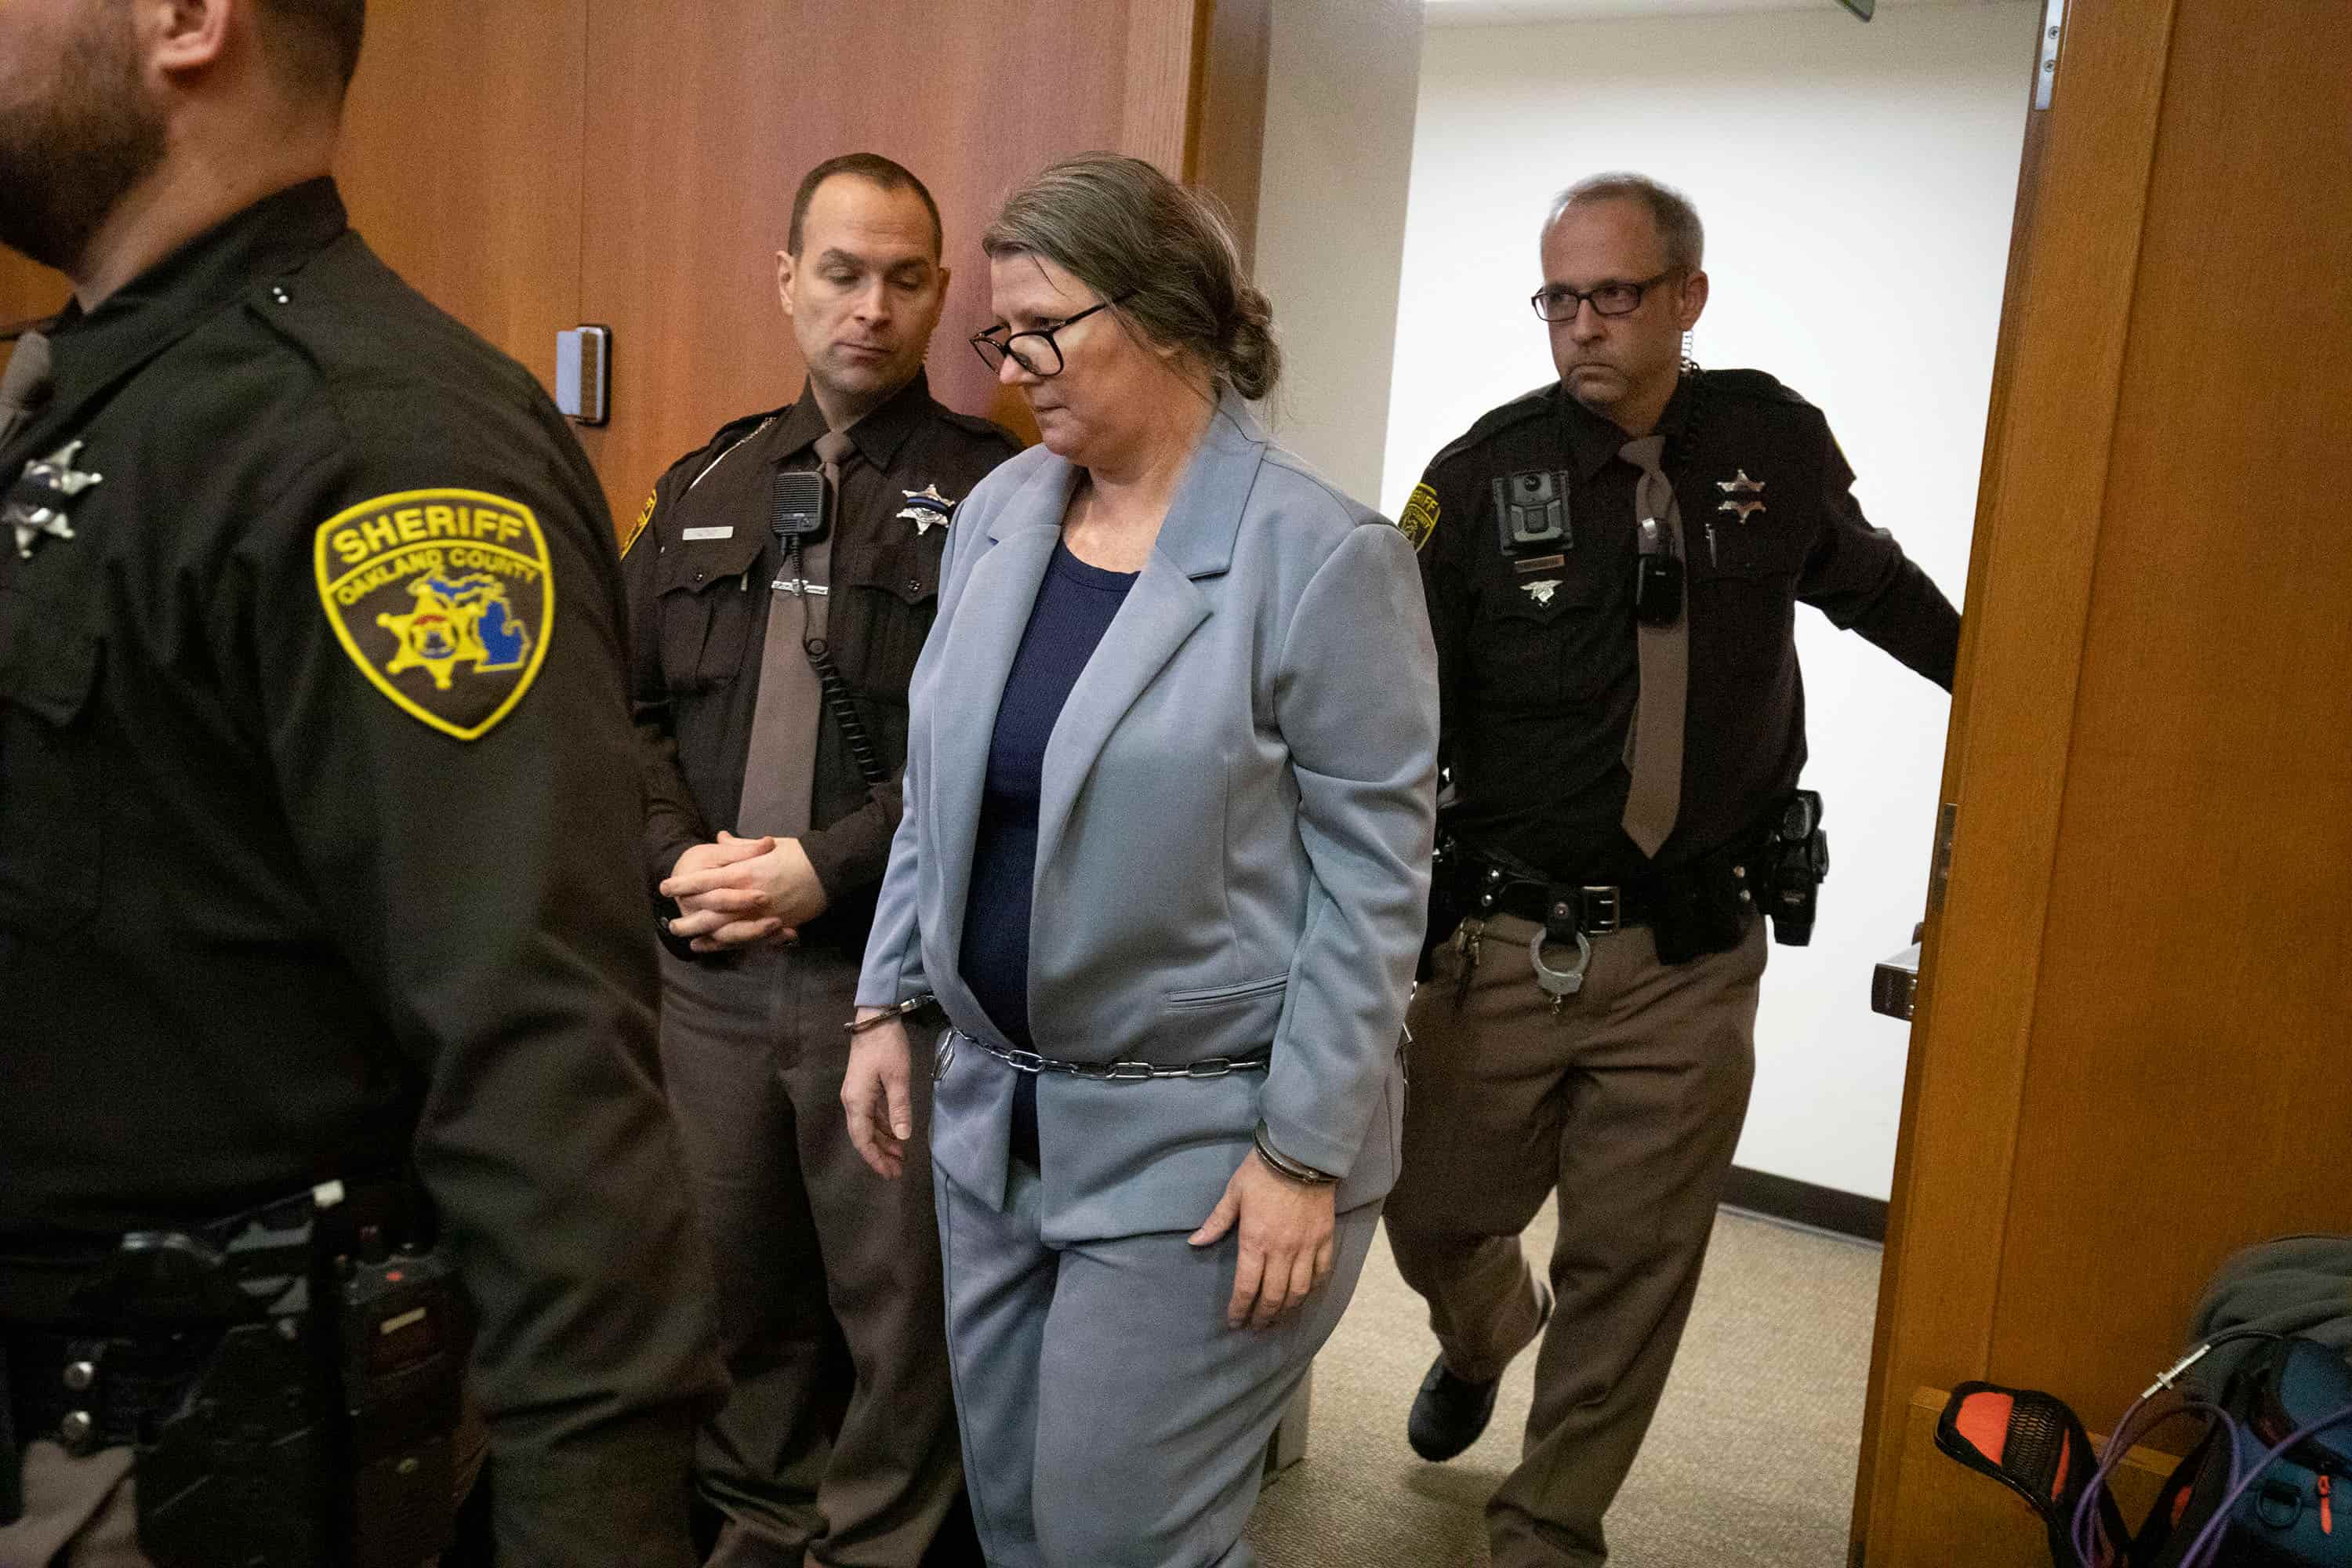 Mother of Michigan School Shooter Takes Stand in Her Own Trial